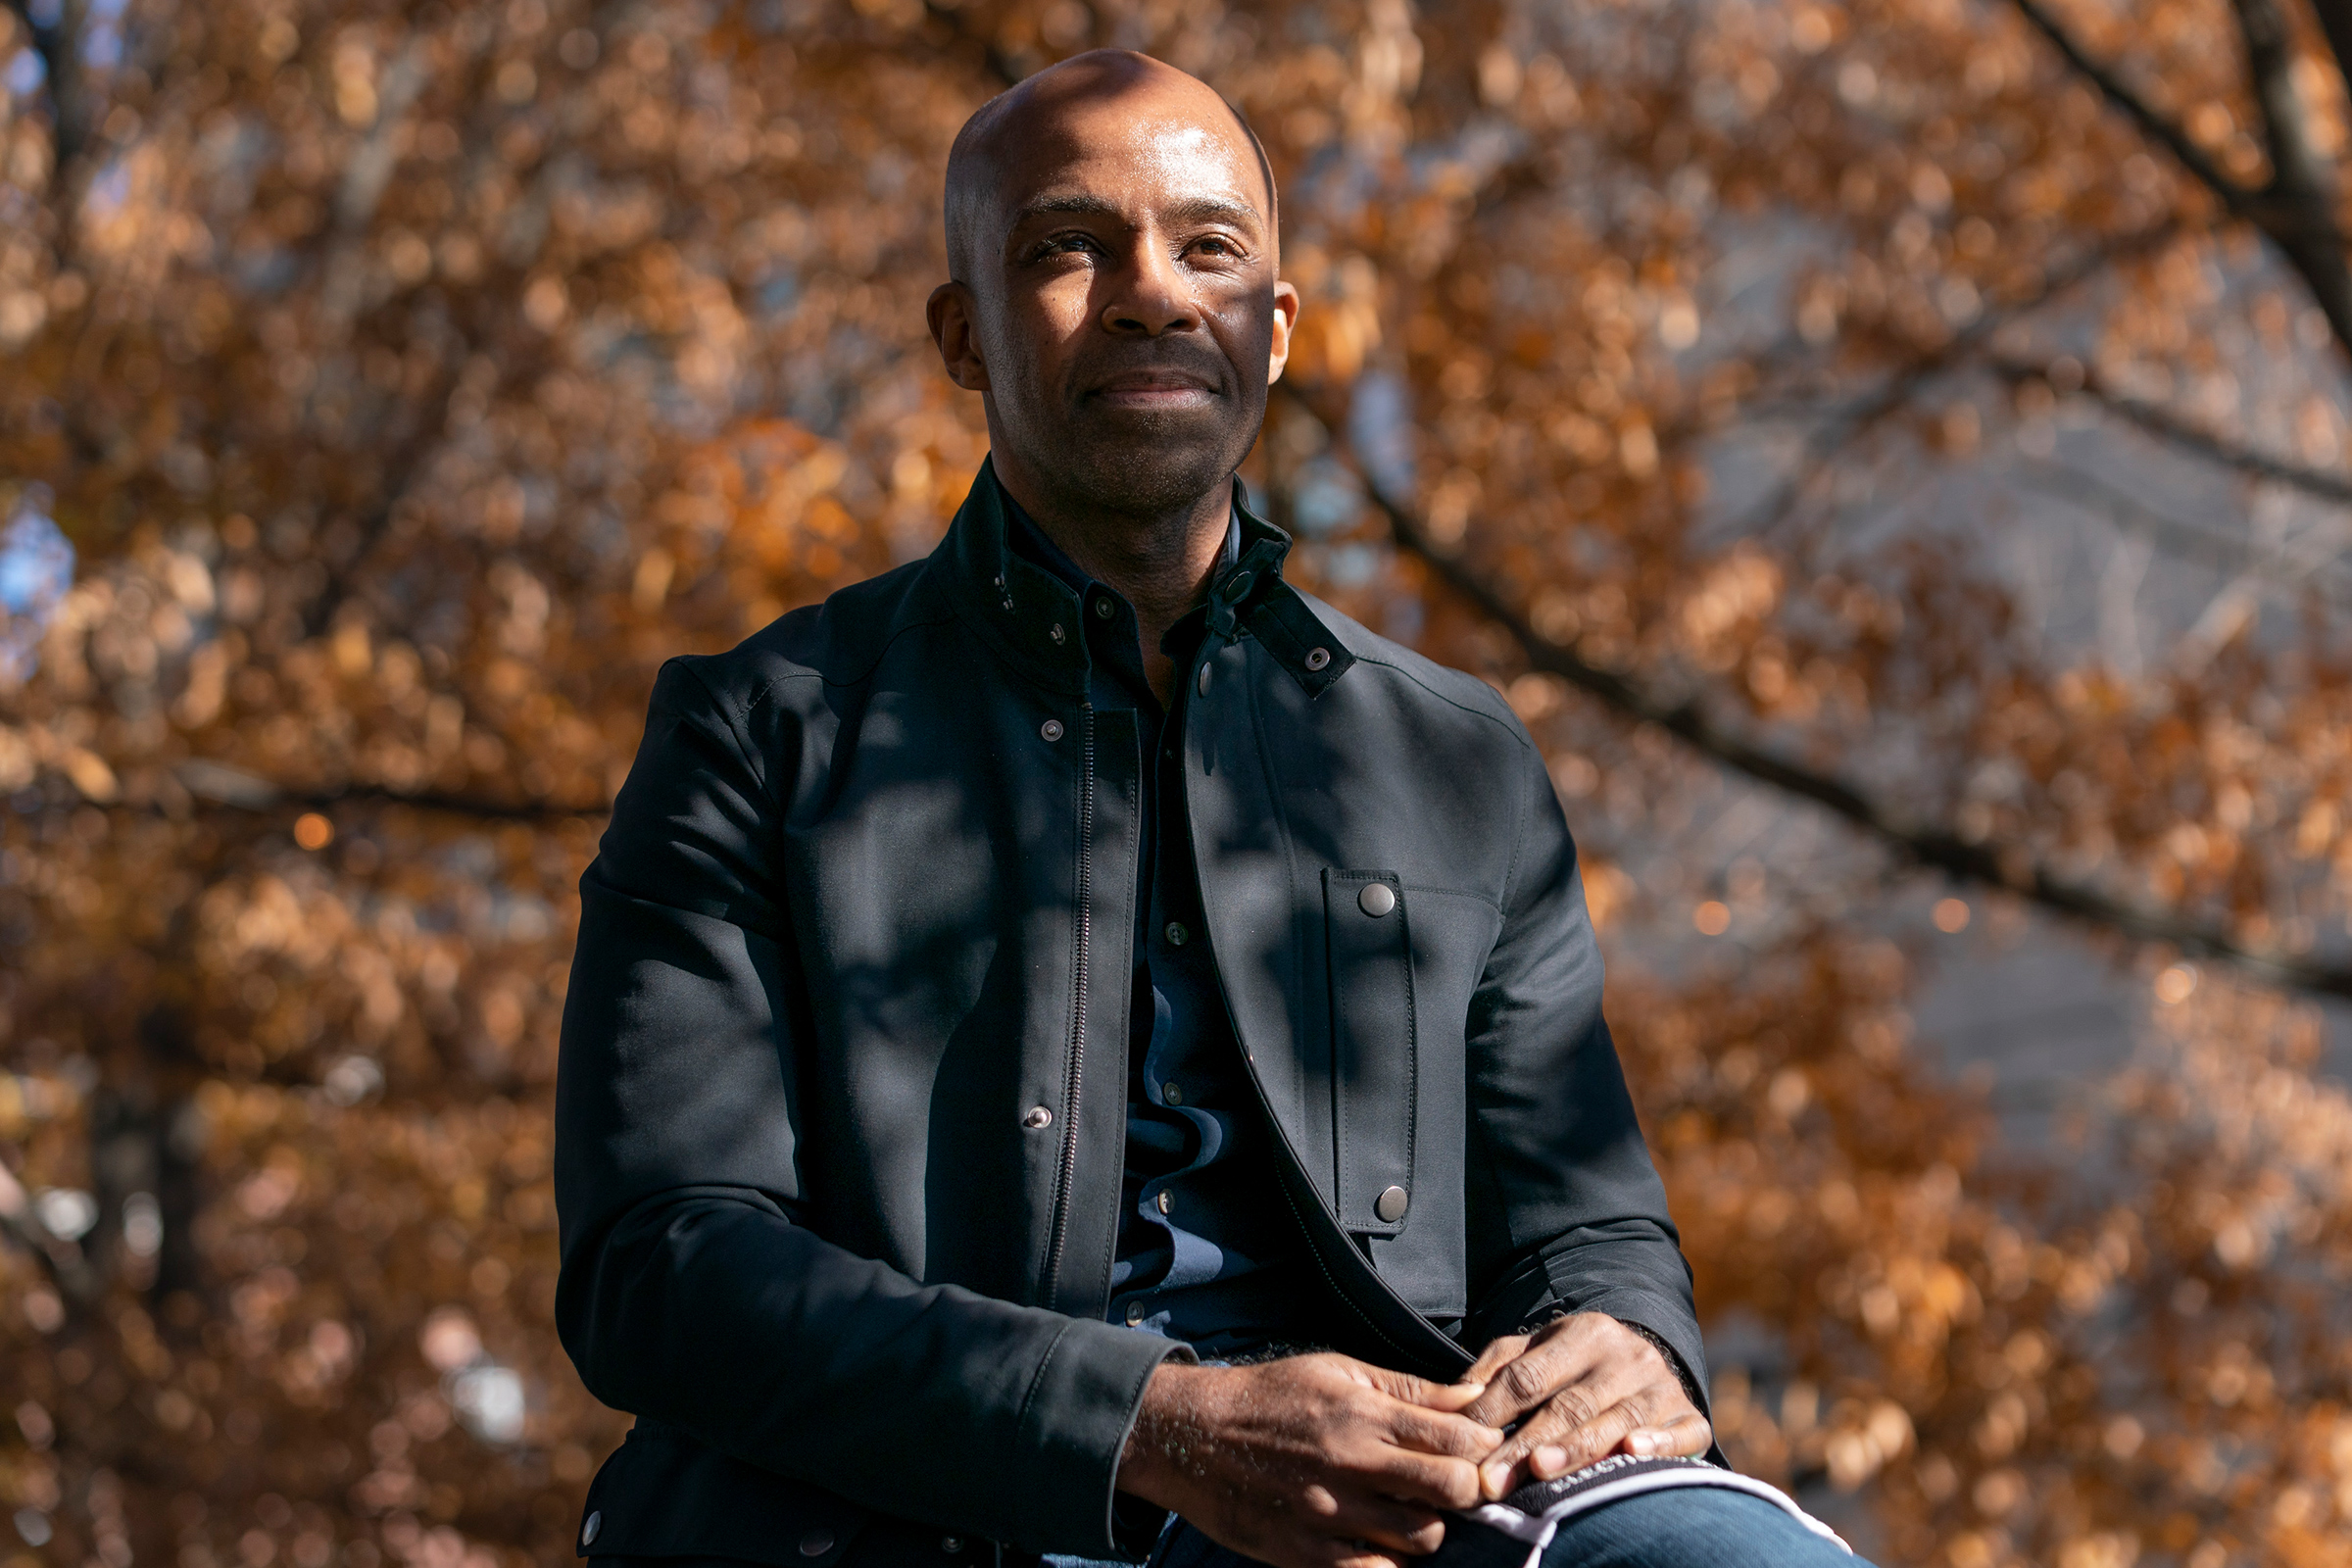 Alphonso David on Dec. 19, 2020. David was fired from his role as president of the powerful LGBTQ advocacy group Human Rights Campaign on Sept. 6. (Elijah Nouvelage—The Washington Post/Getty Images)